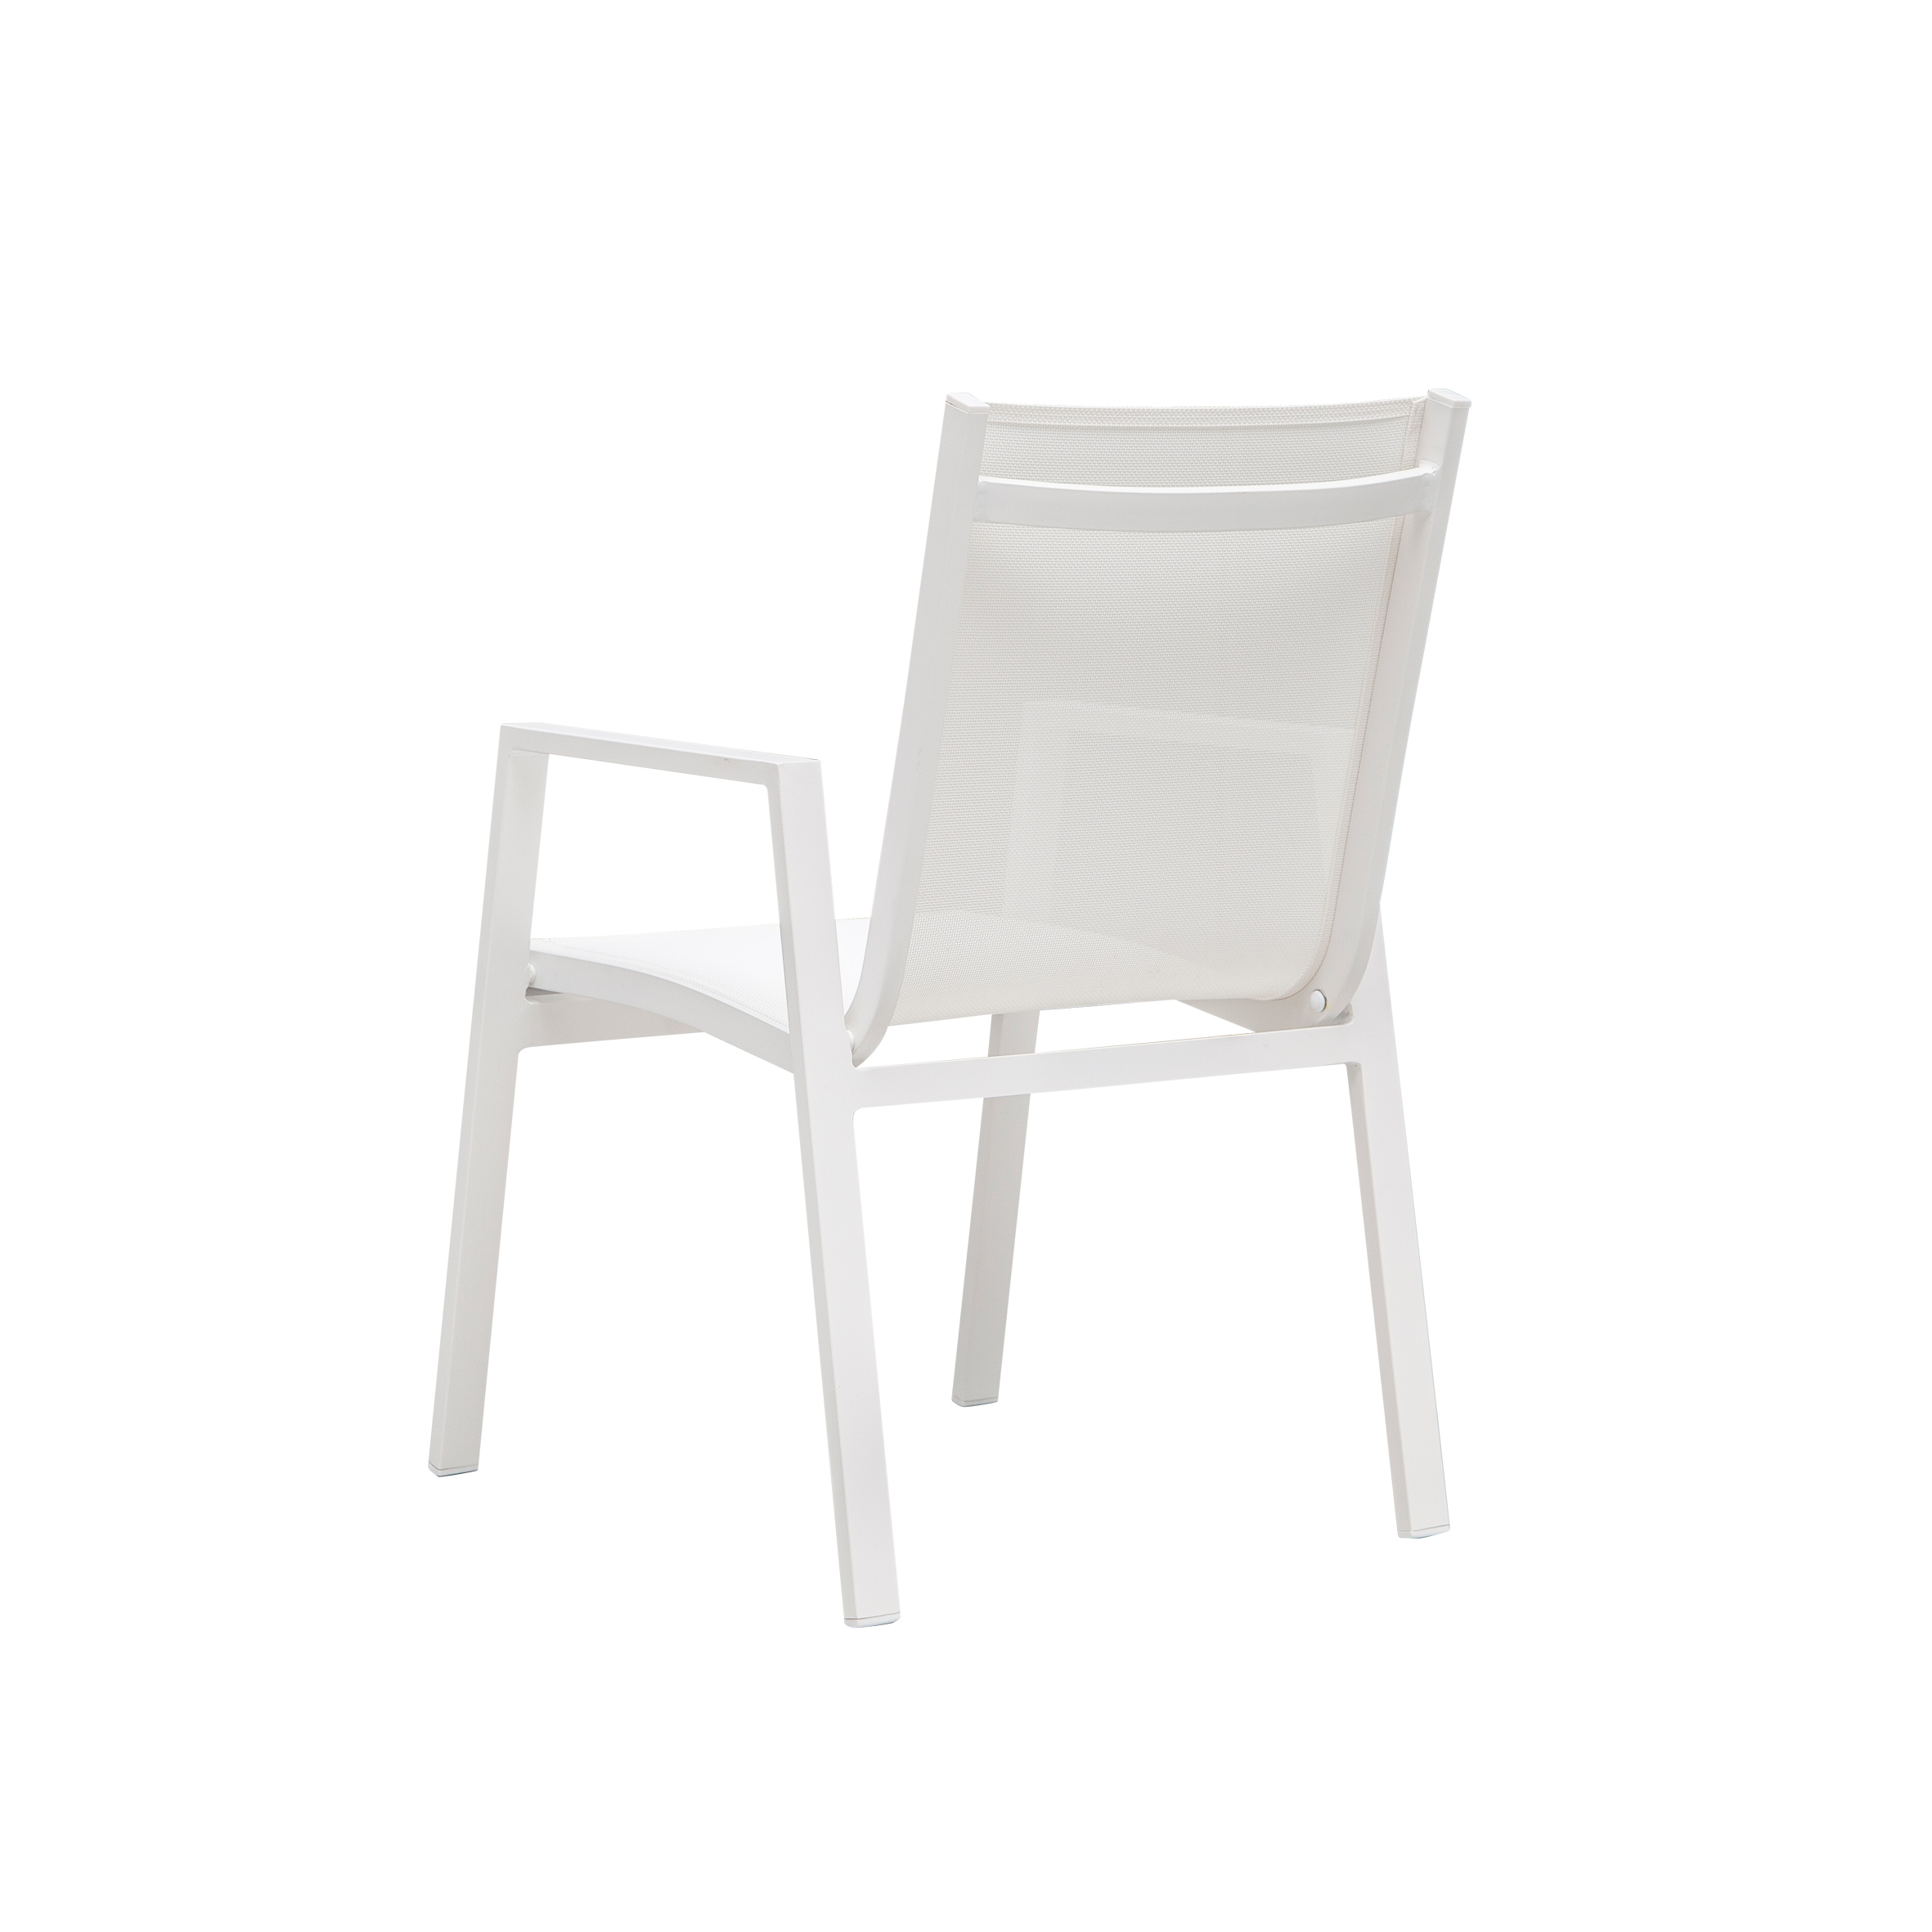 Snow white textile dining chair S4